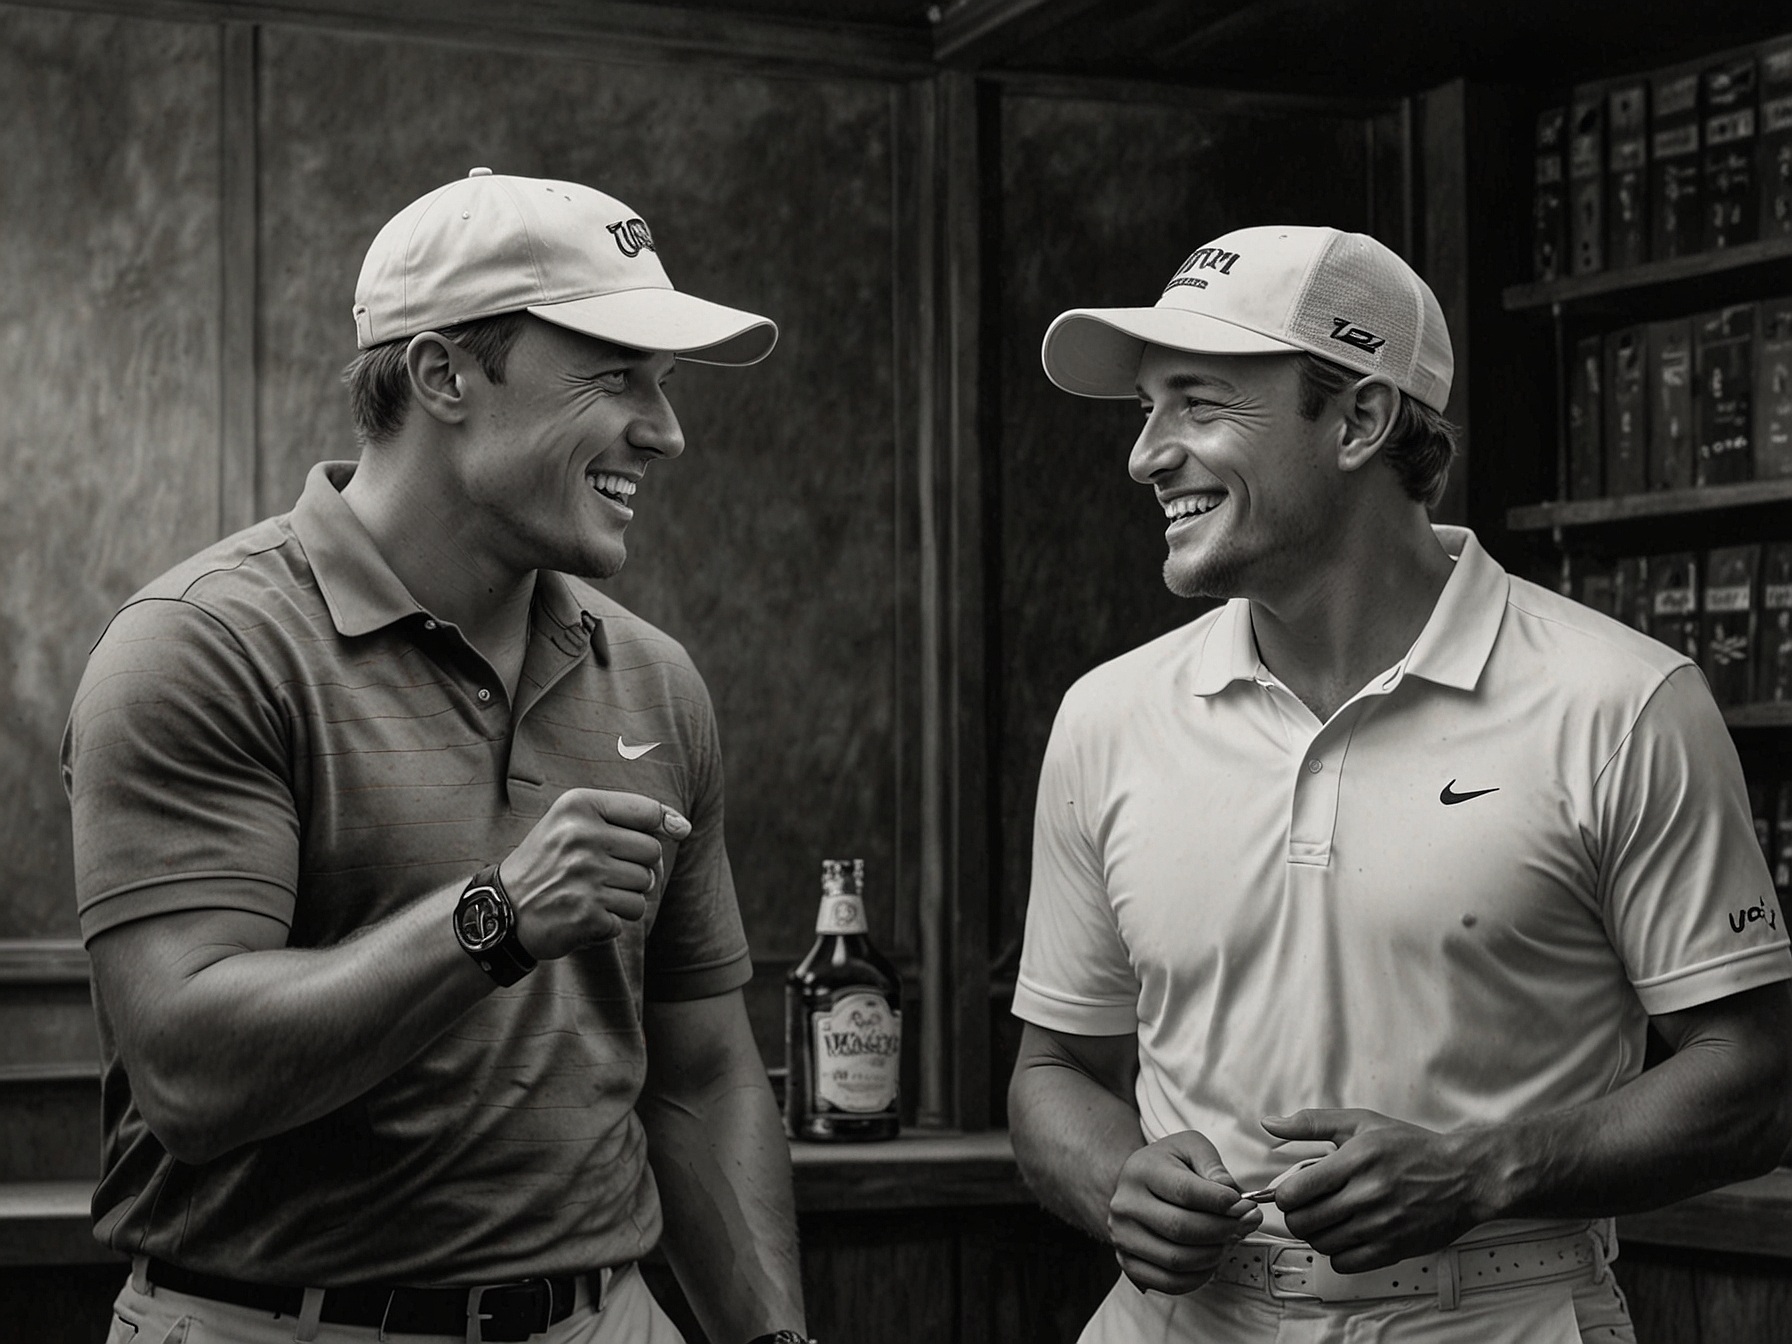 DeChambeau and Wagner share a light-hearted moment in the bunker, Wagner providing insightful commentary and personal anecdotes about his U.S. Open experience.